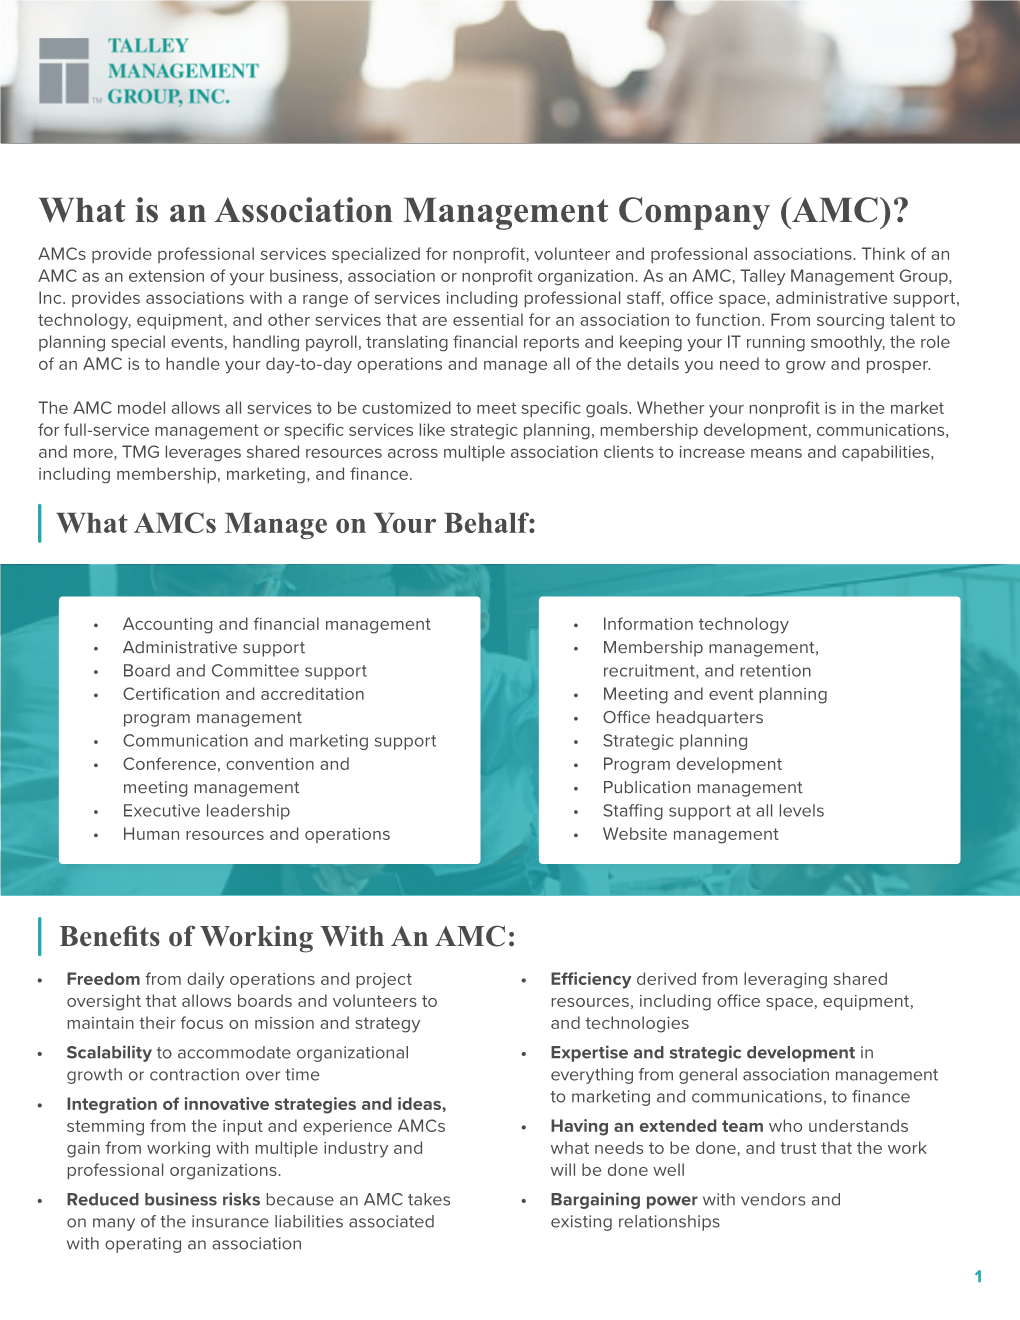 What Is an Association Management Company (AMC)? Amcs Provide Professional Services Specialized for Nonprofit, Volunteer and Professional Associations